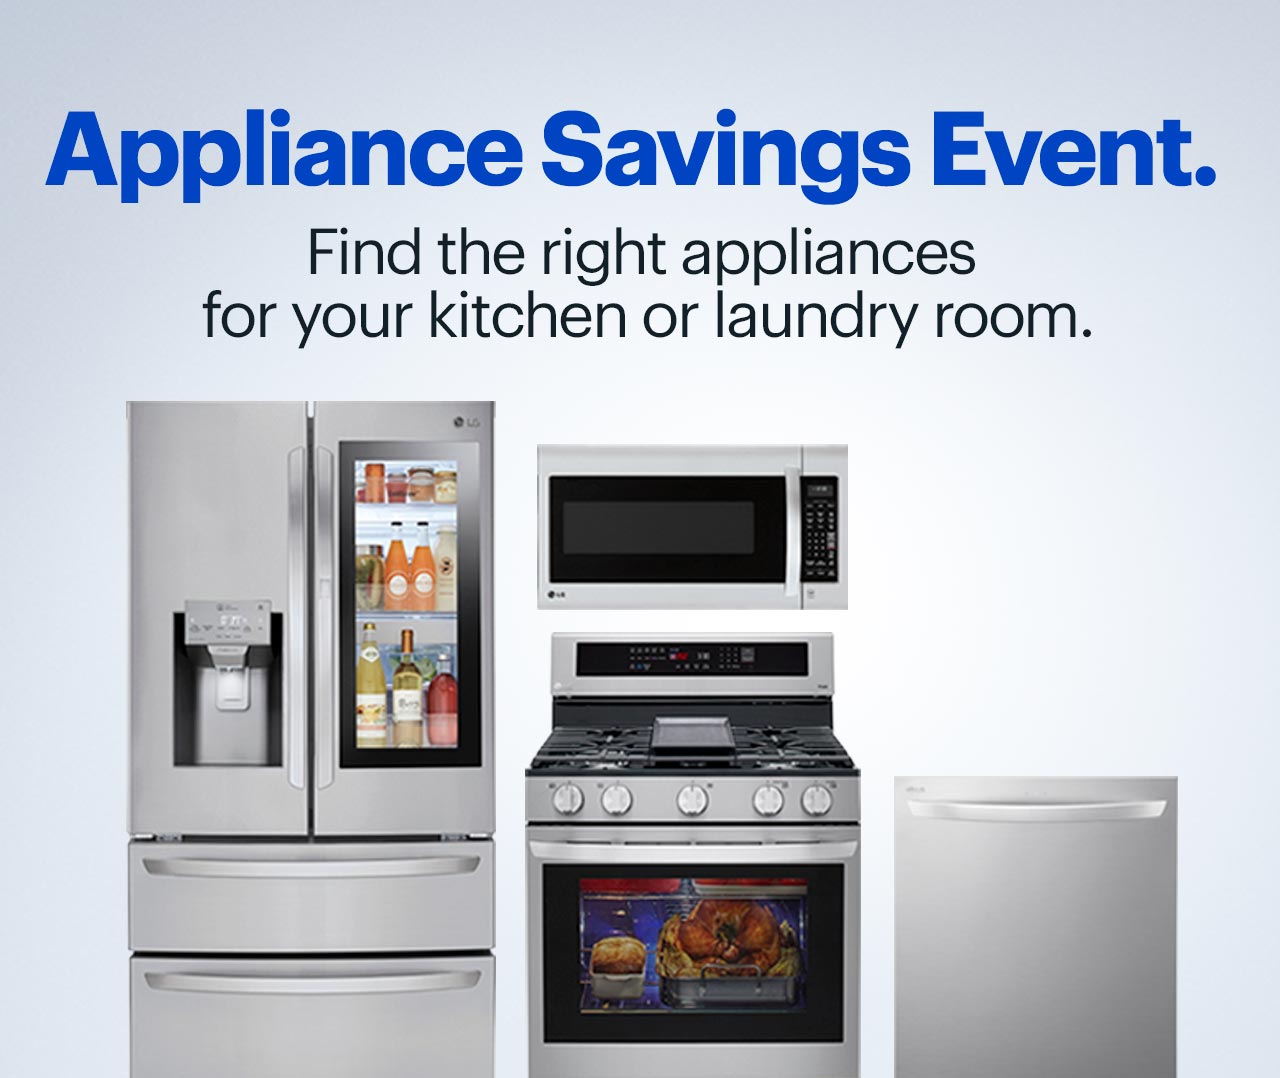 Appliance Savings Event. Find the right appliances for your kitchen or laundry room.